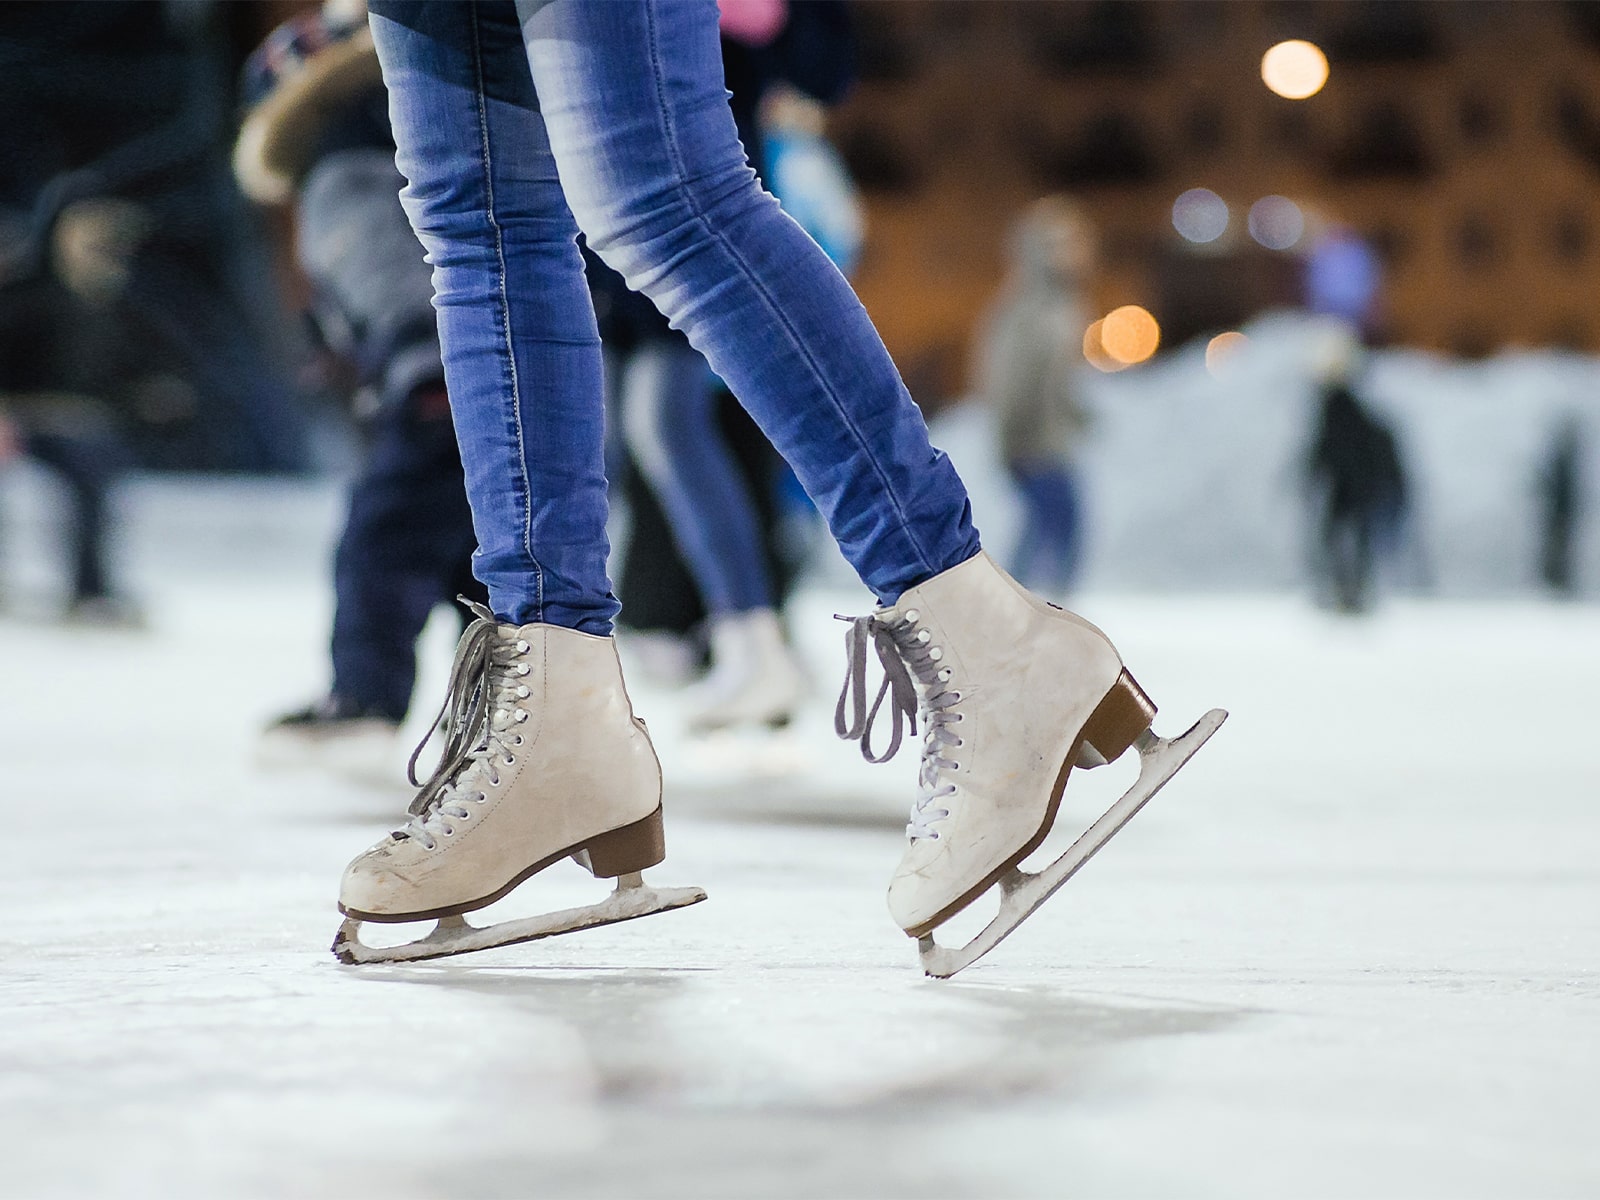 Cork's Alpine Skate Trail is BACK with Limited Early Bird Offer